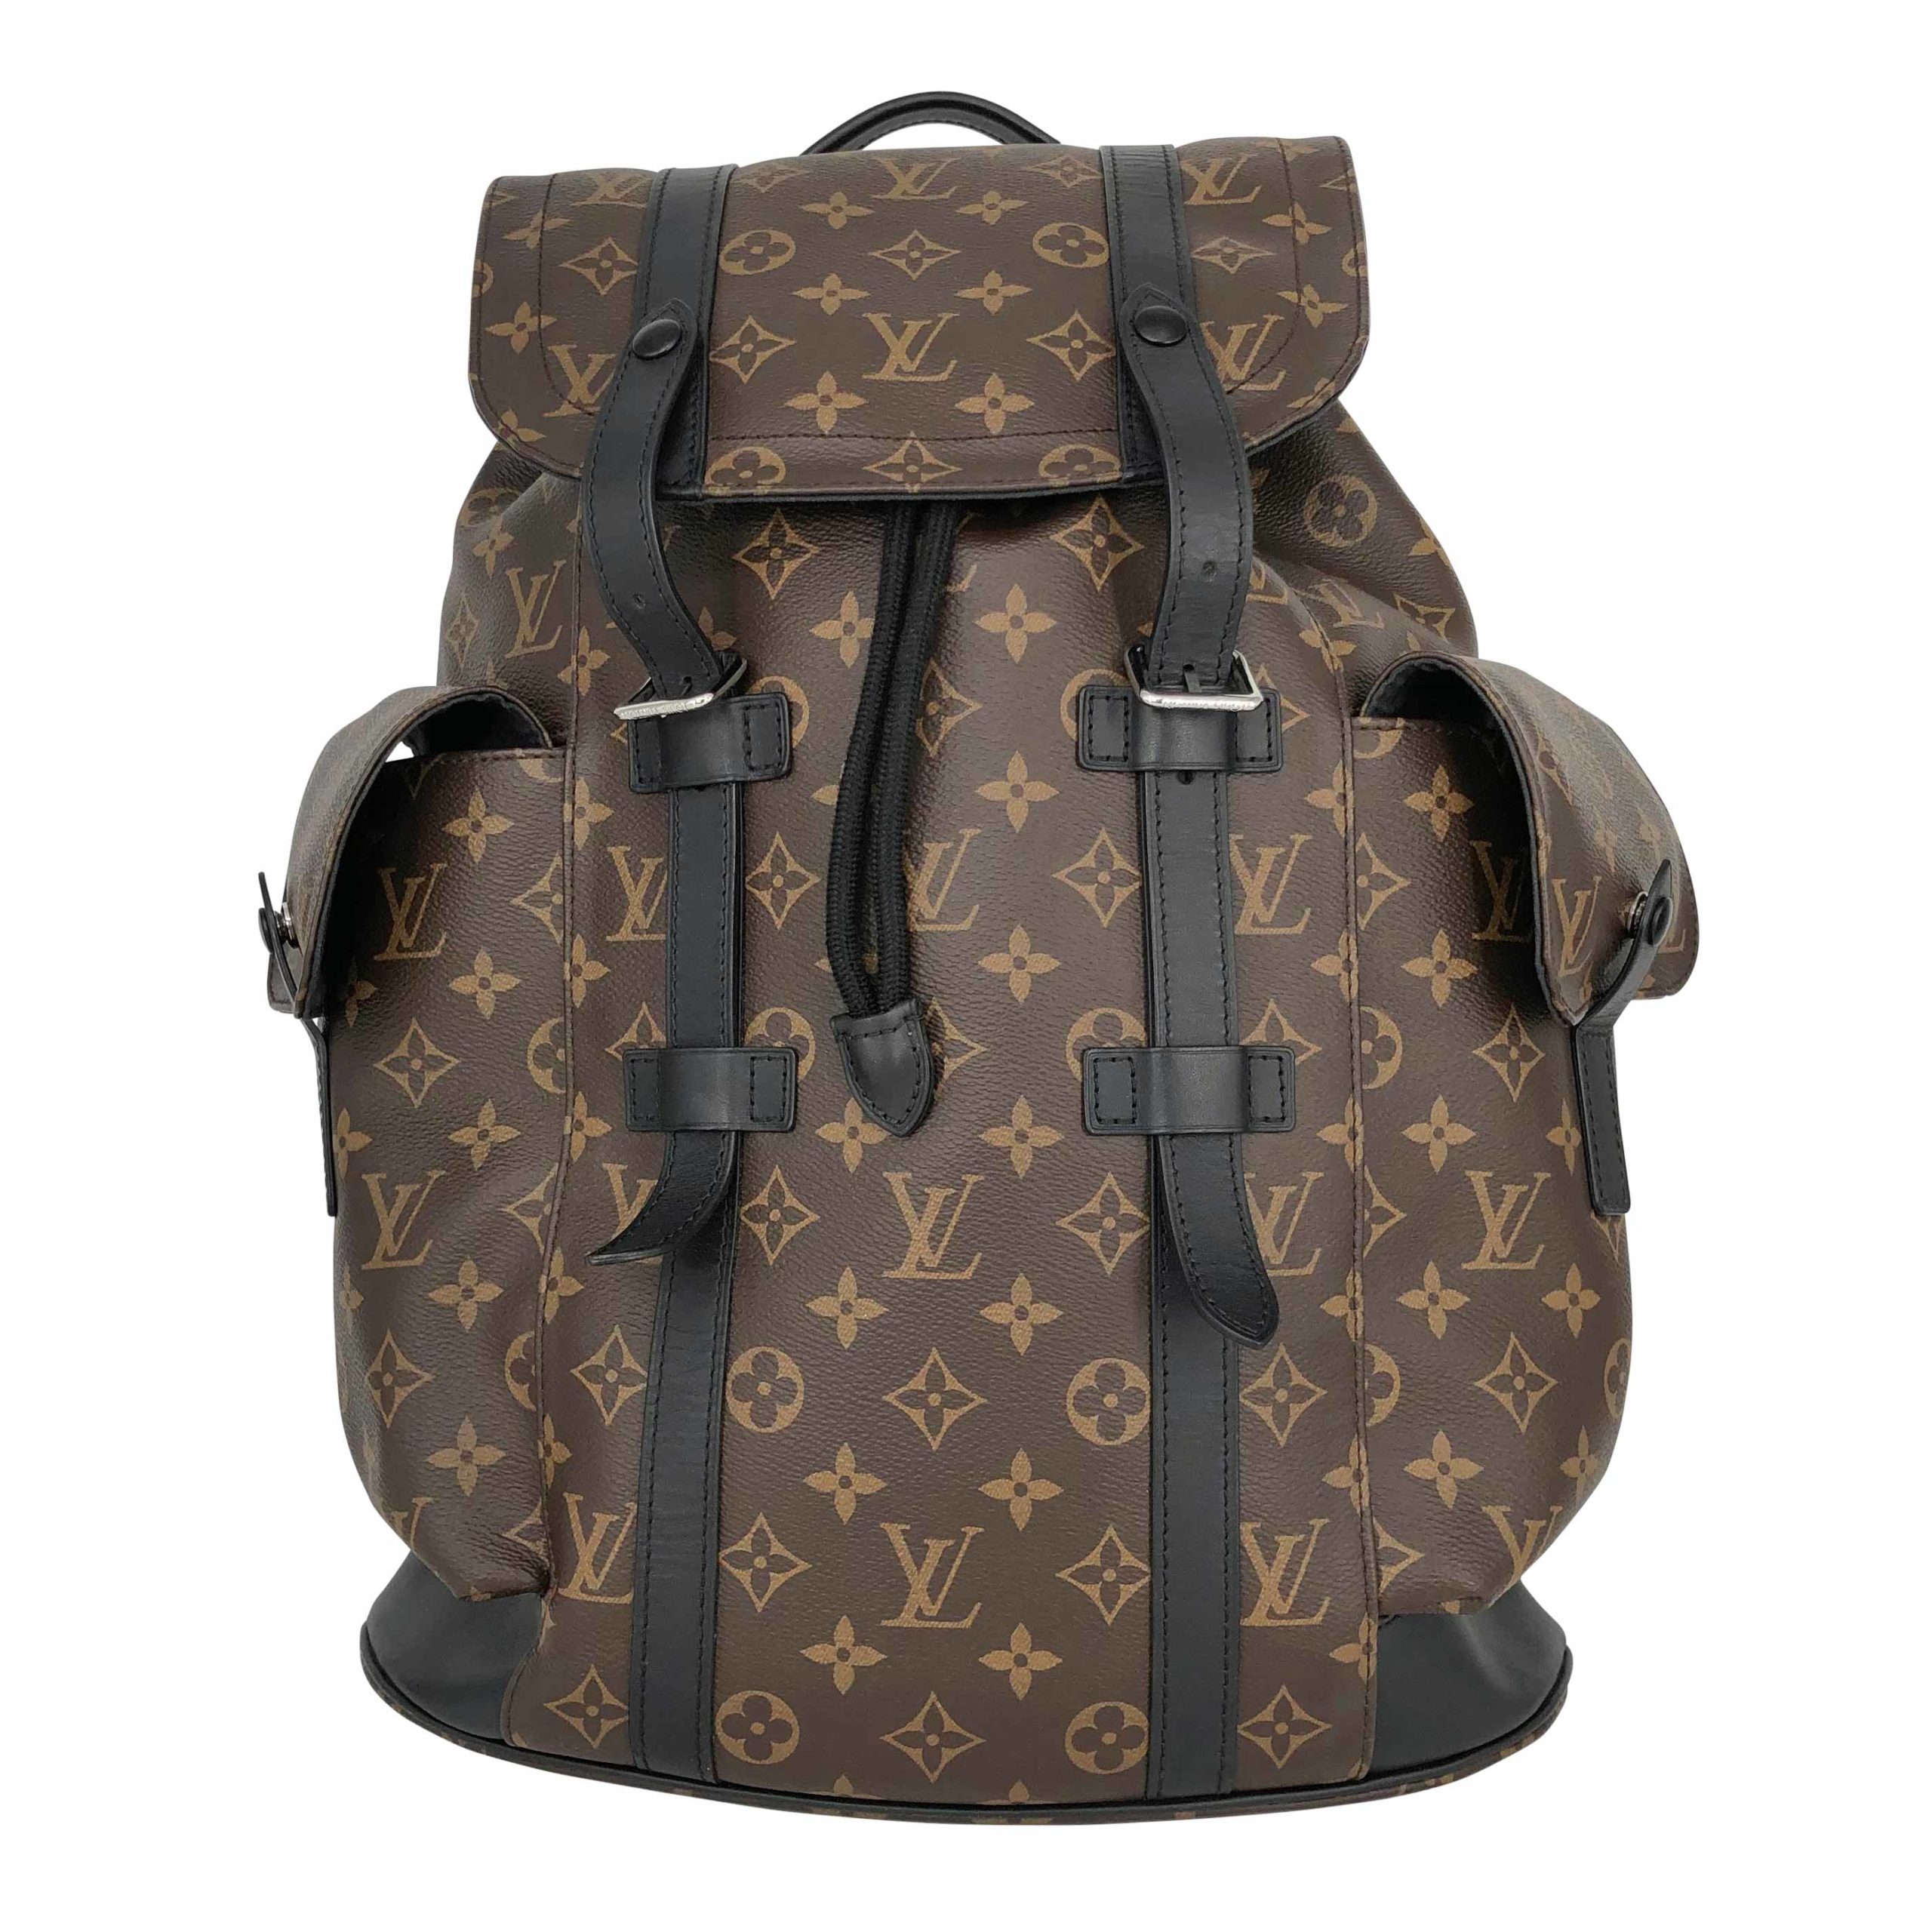 Near Mint] Louis Vuitton Christopher PM Monogram Leather Backpack